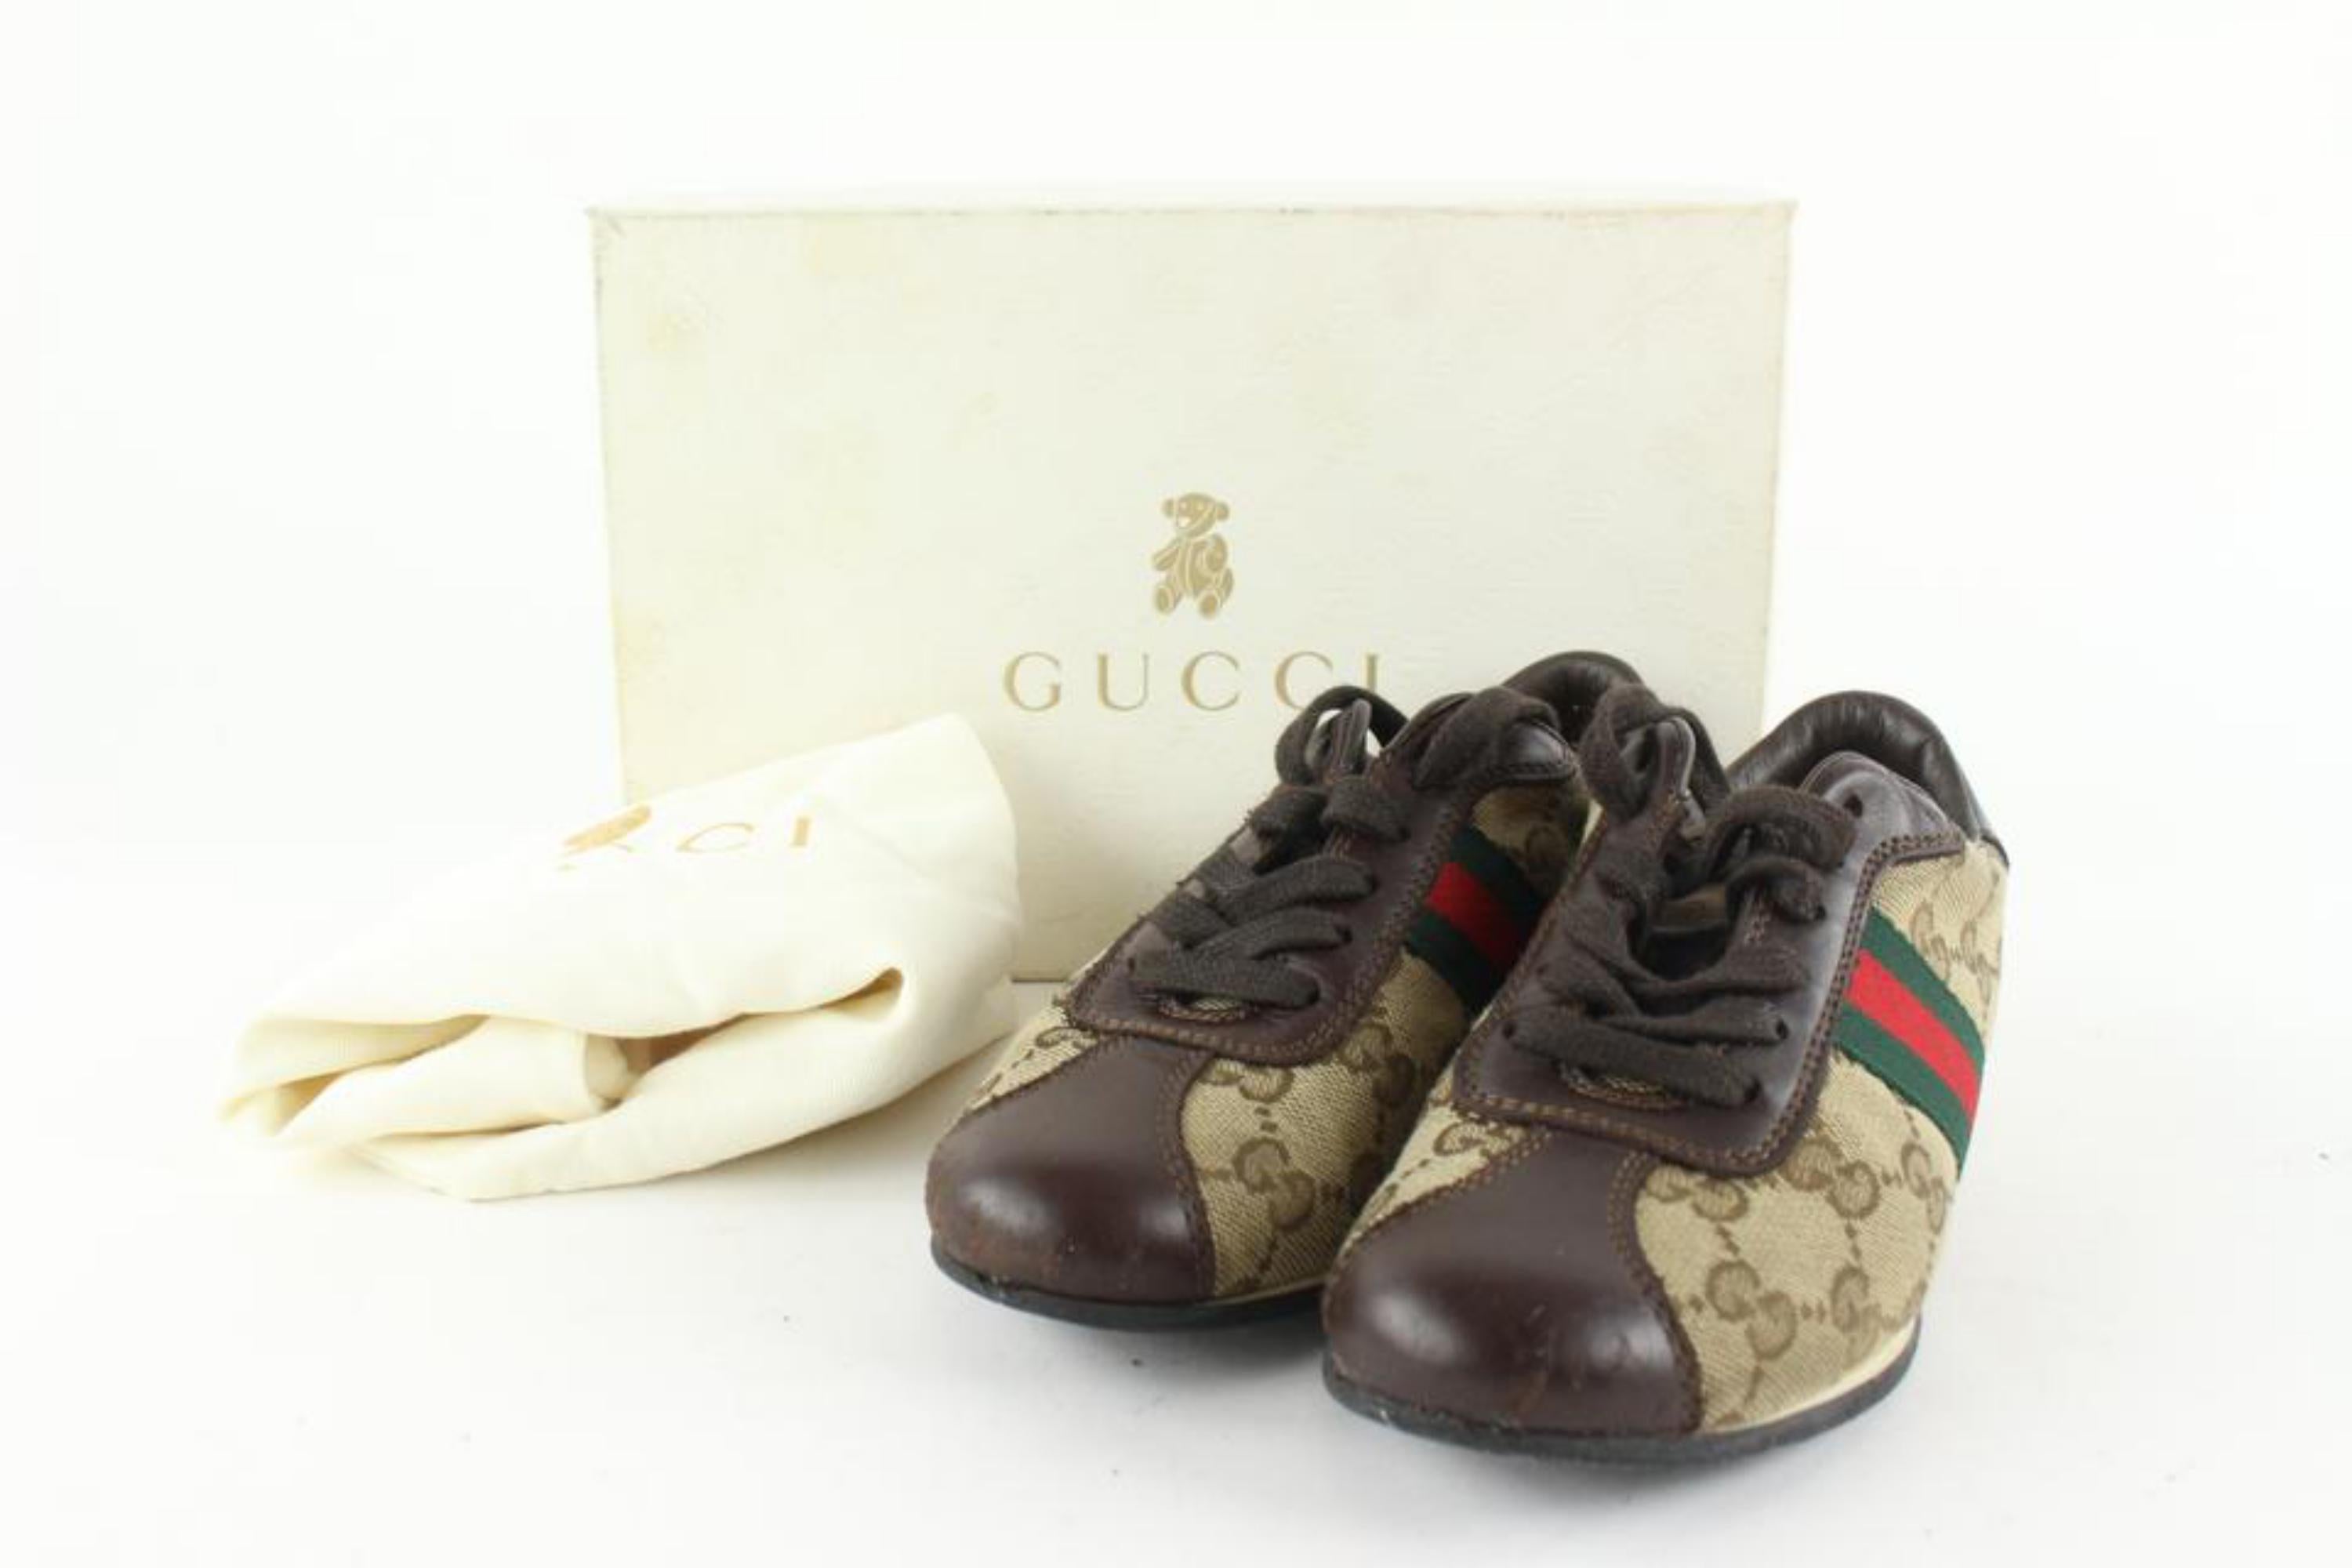 Gucci 1.5 US Kids Size Monogram GG Web Sneaker 1223g12
Date Code/Serial Number: 257826
Made In: Italy
Measurements: Length:  8.5